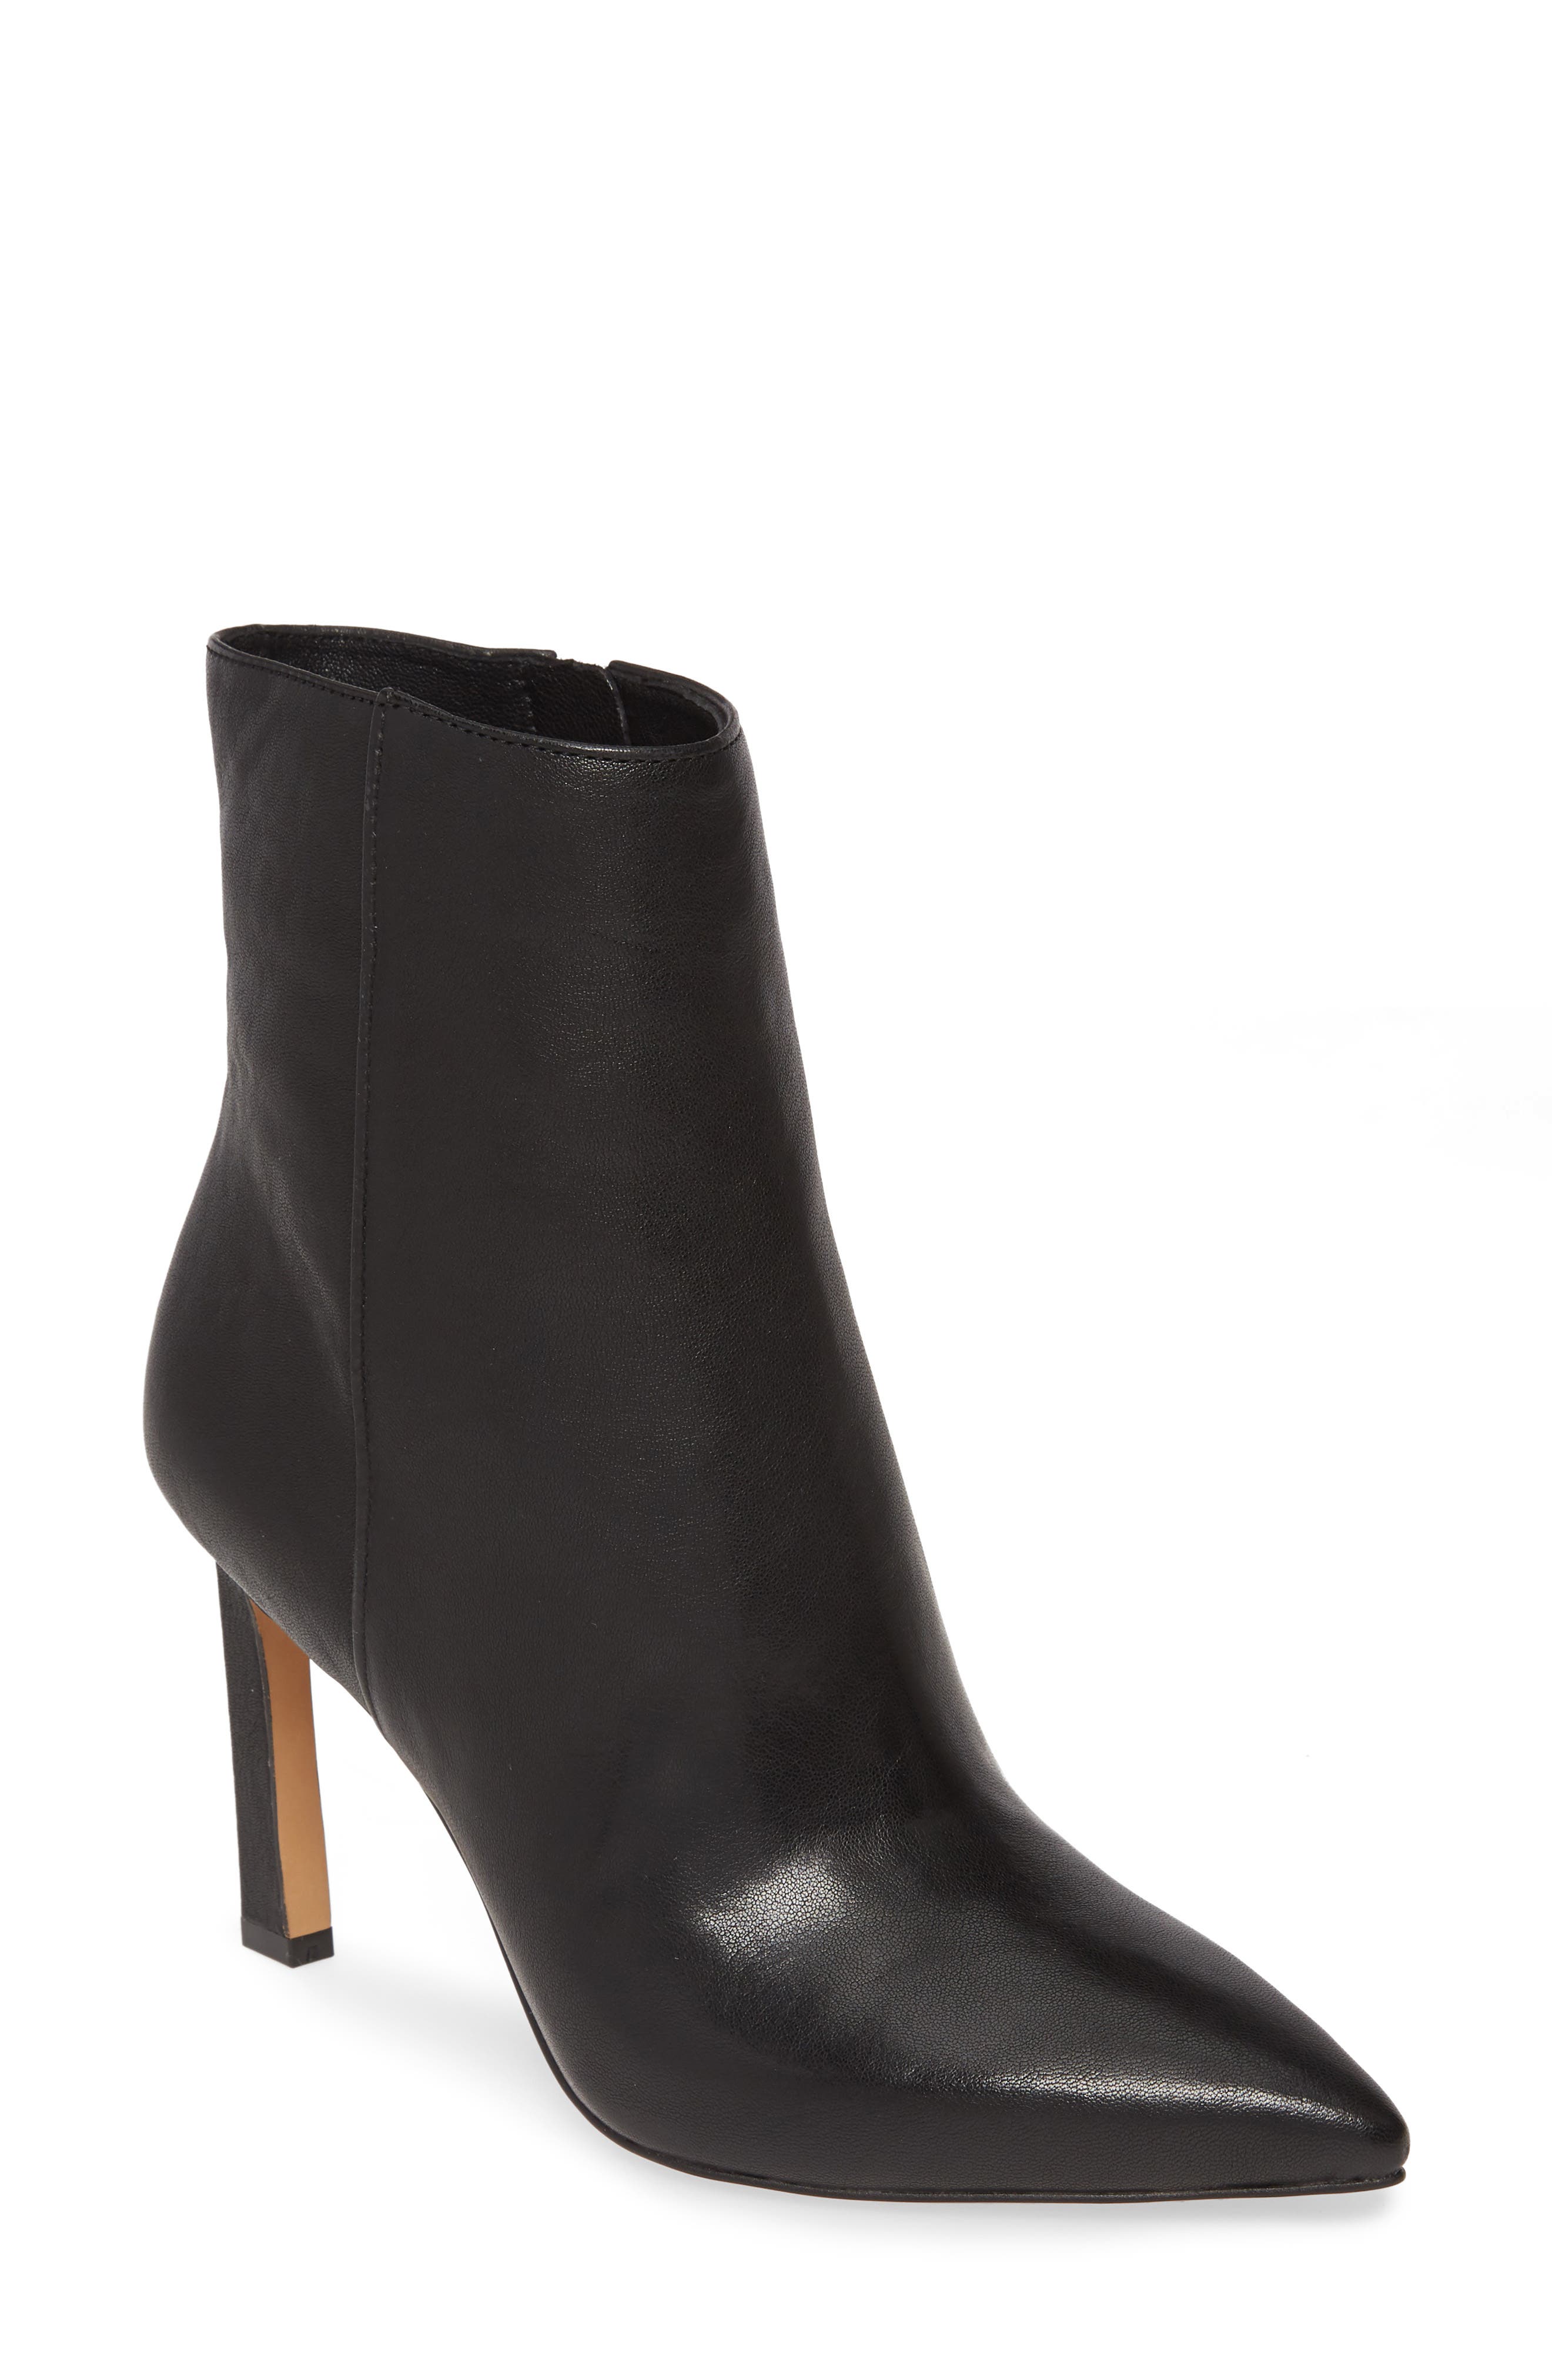 Vince Camuto Sashala Pointed Toe Bootie 